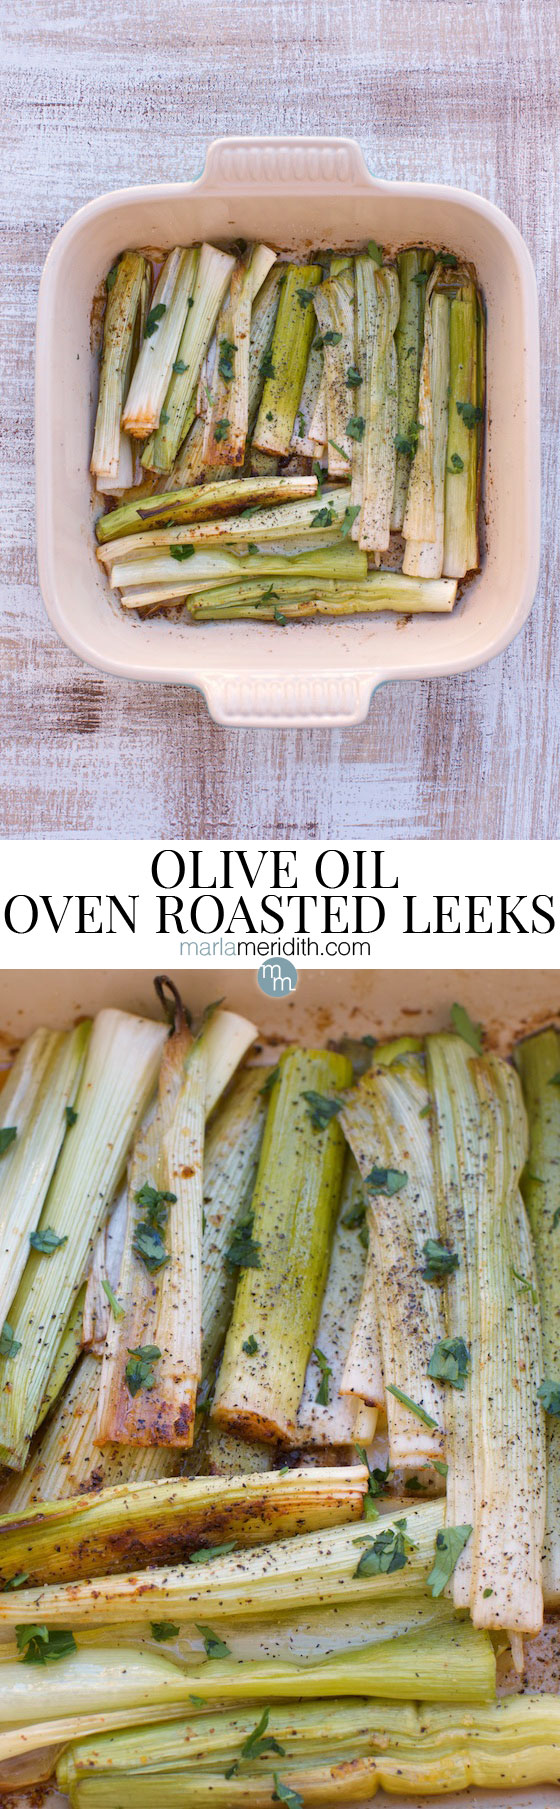 Olive Oil Oven Roasted Leeks #recipe These are delish in pastas, salads, soups & more! Marlameridith.com